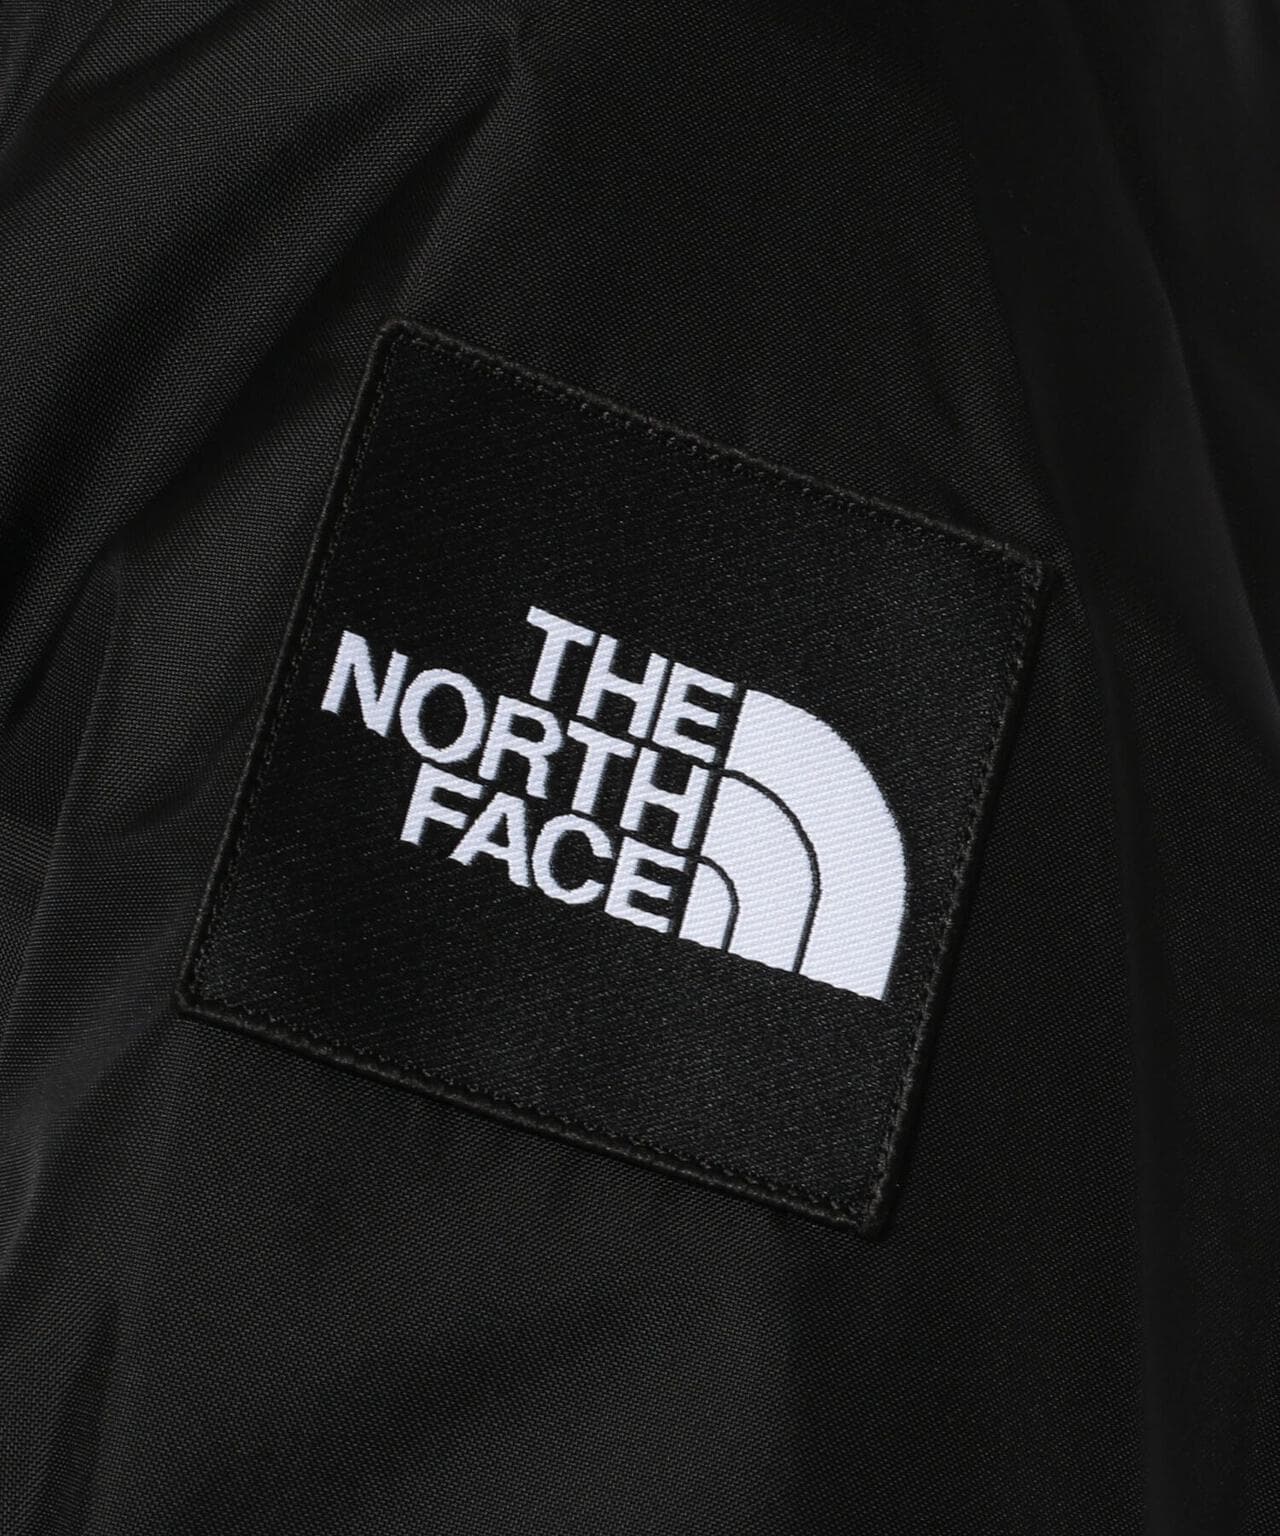 THE NORTH FACE/ザ・ノースフェイス The Coach Jacket | BEAVER ...